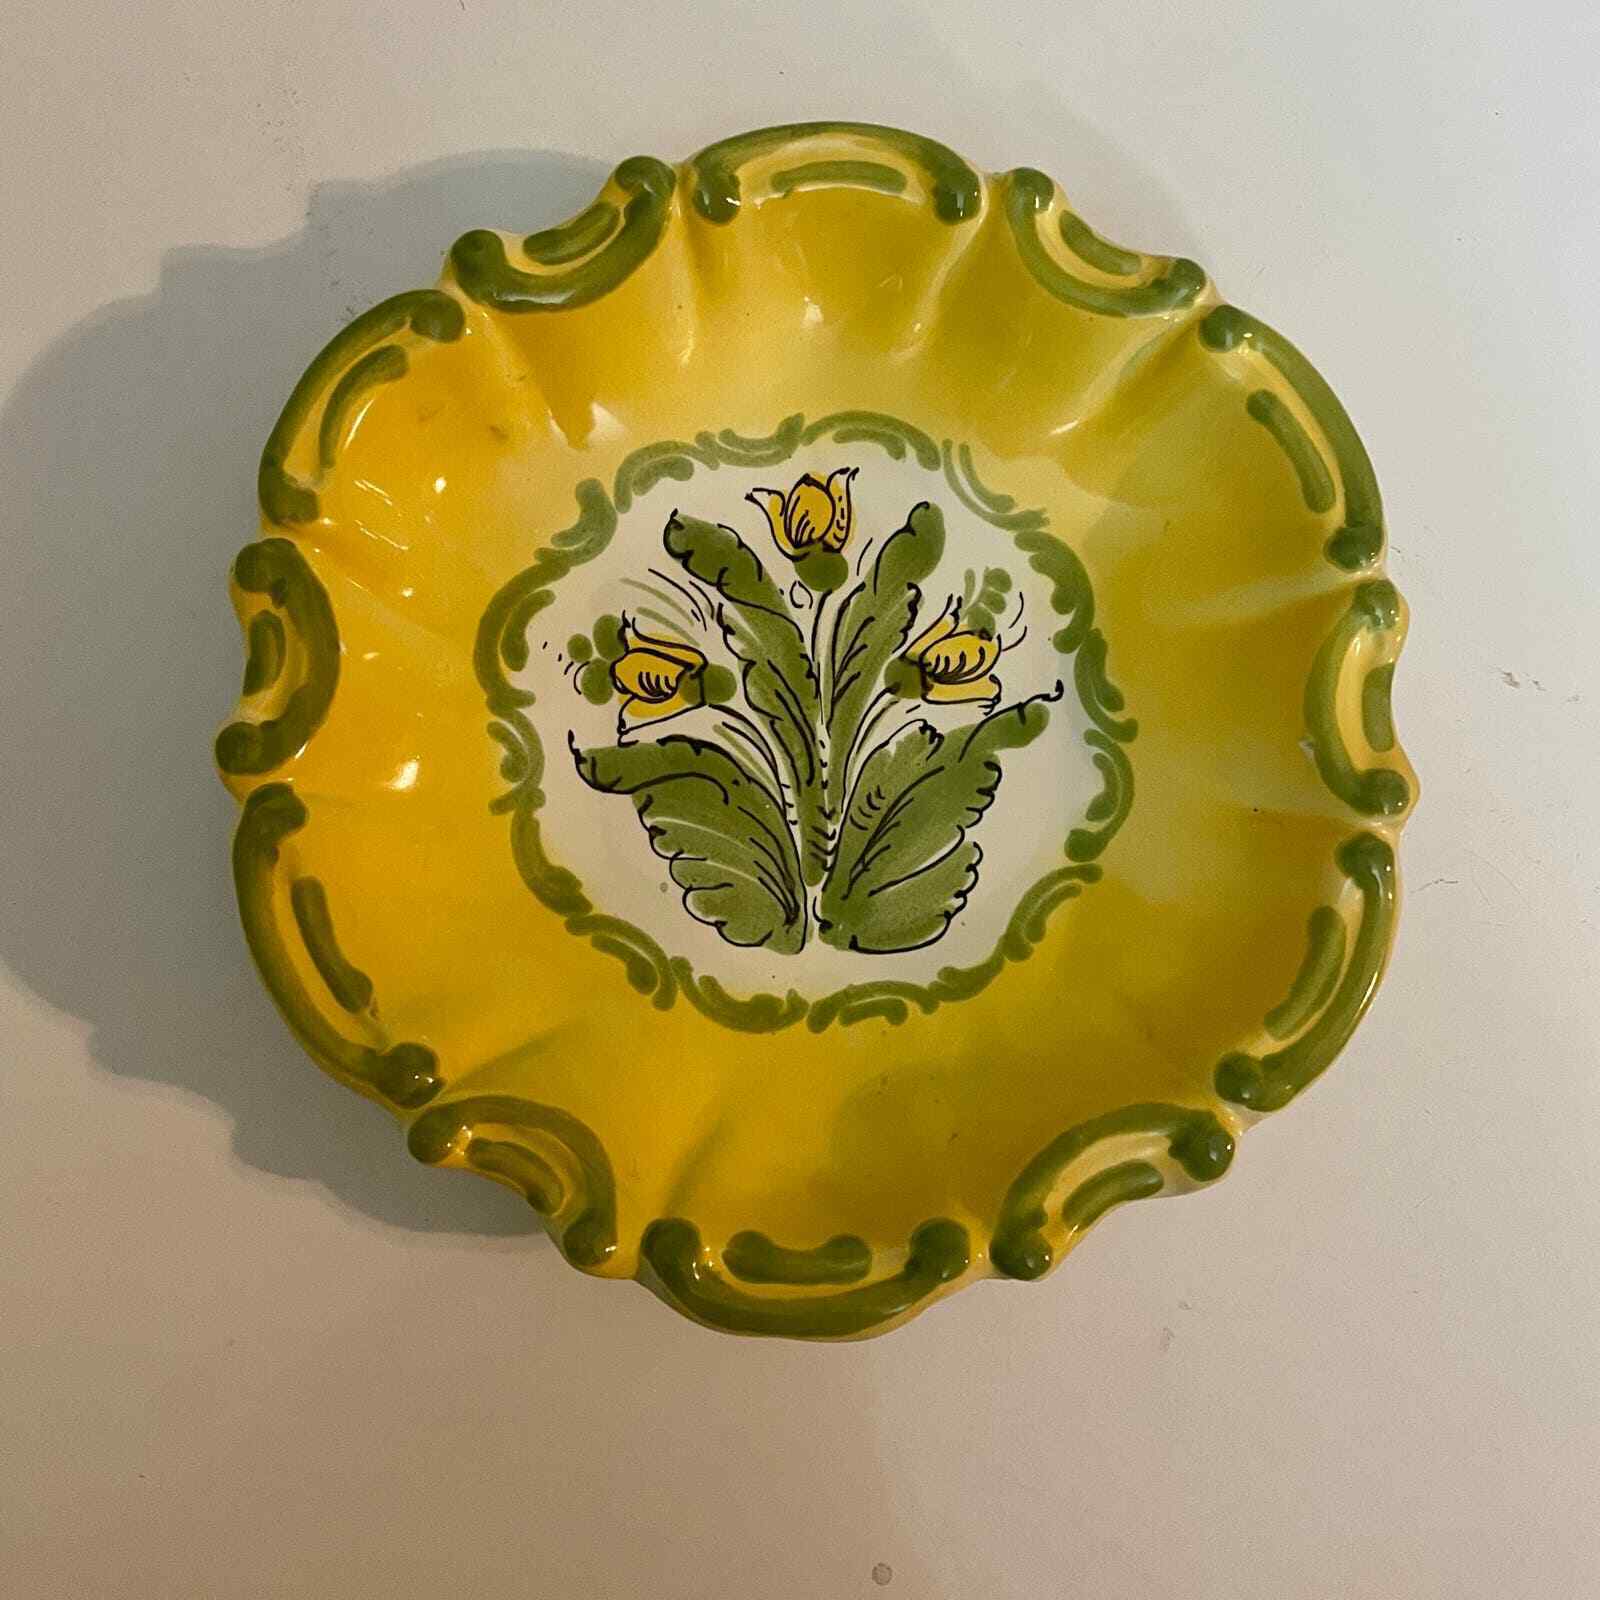 Vintage Meiselman Imports Numbered Collector’s Plate Yellow Floral 